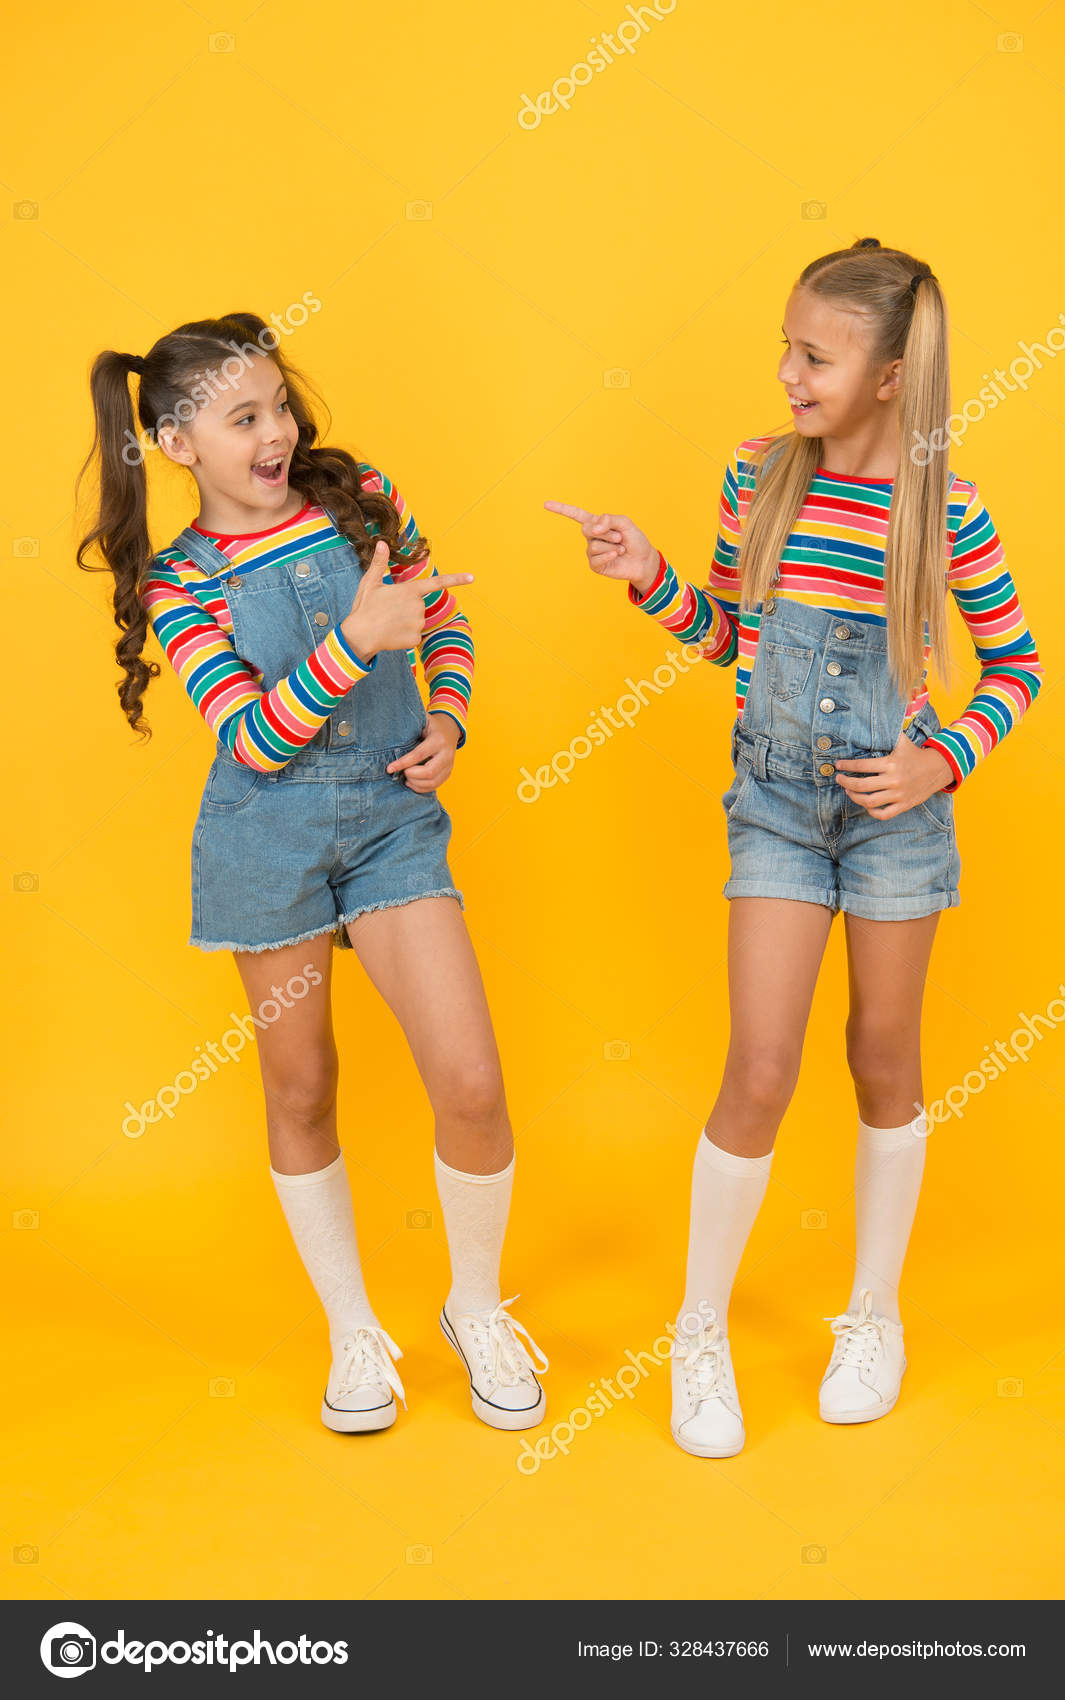 Little Kids Wearing Different Fashion Clothes - Stock